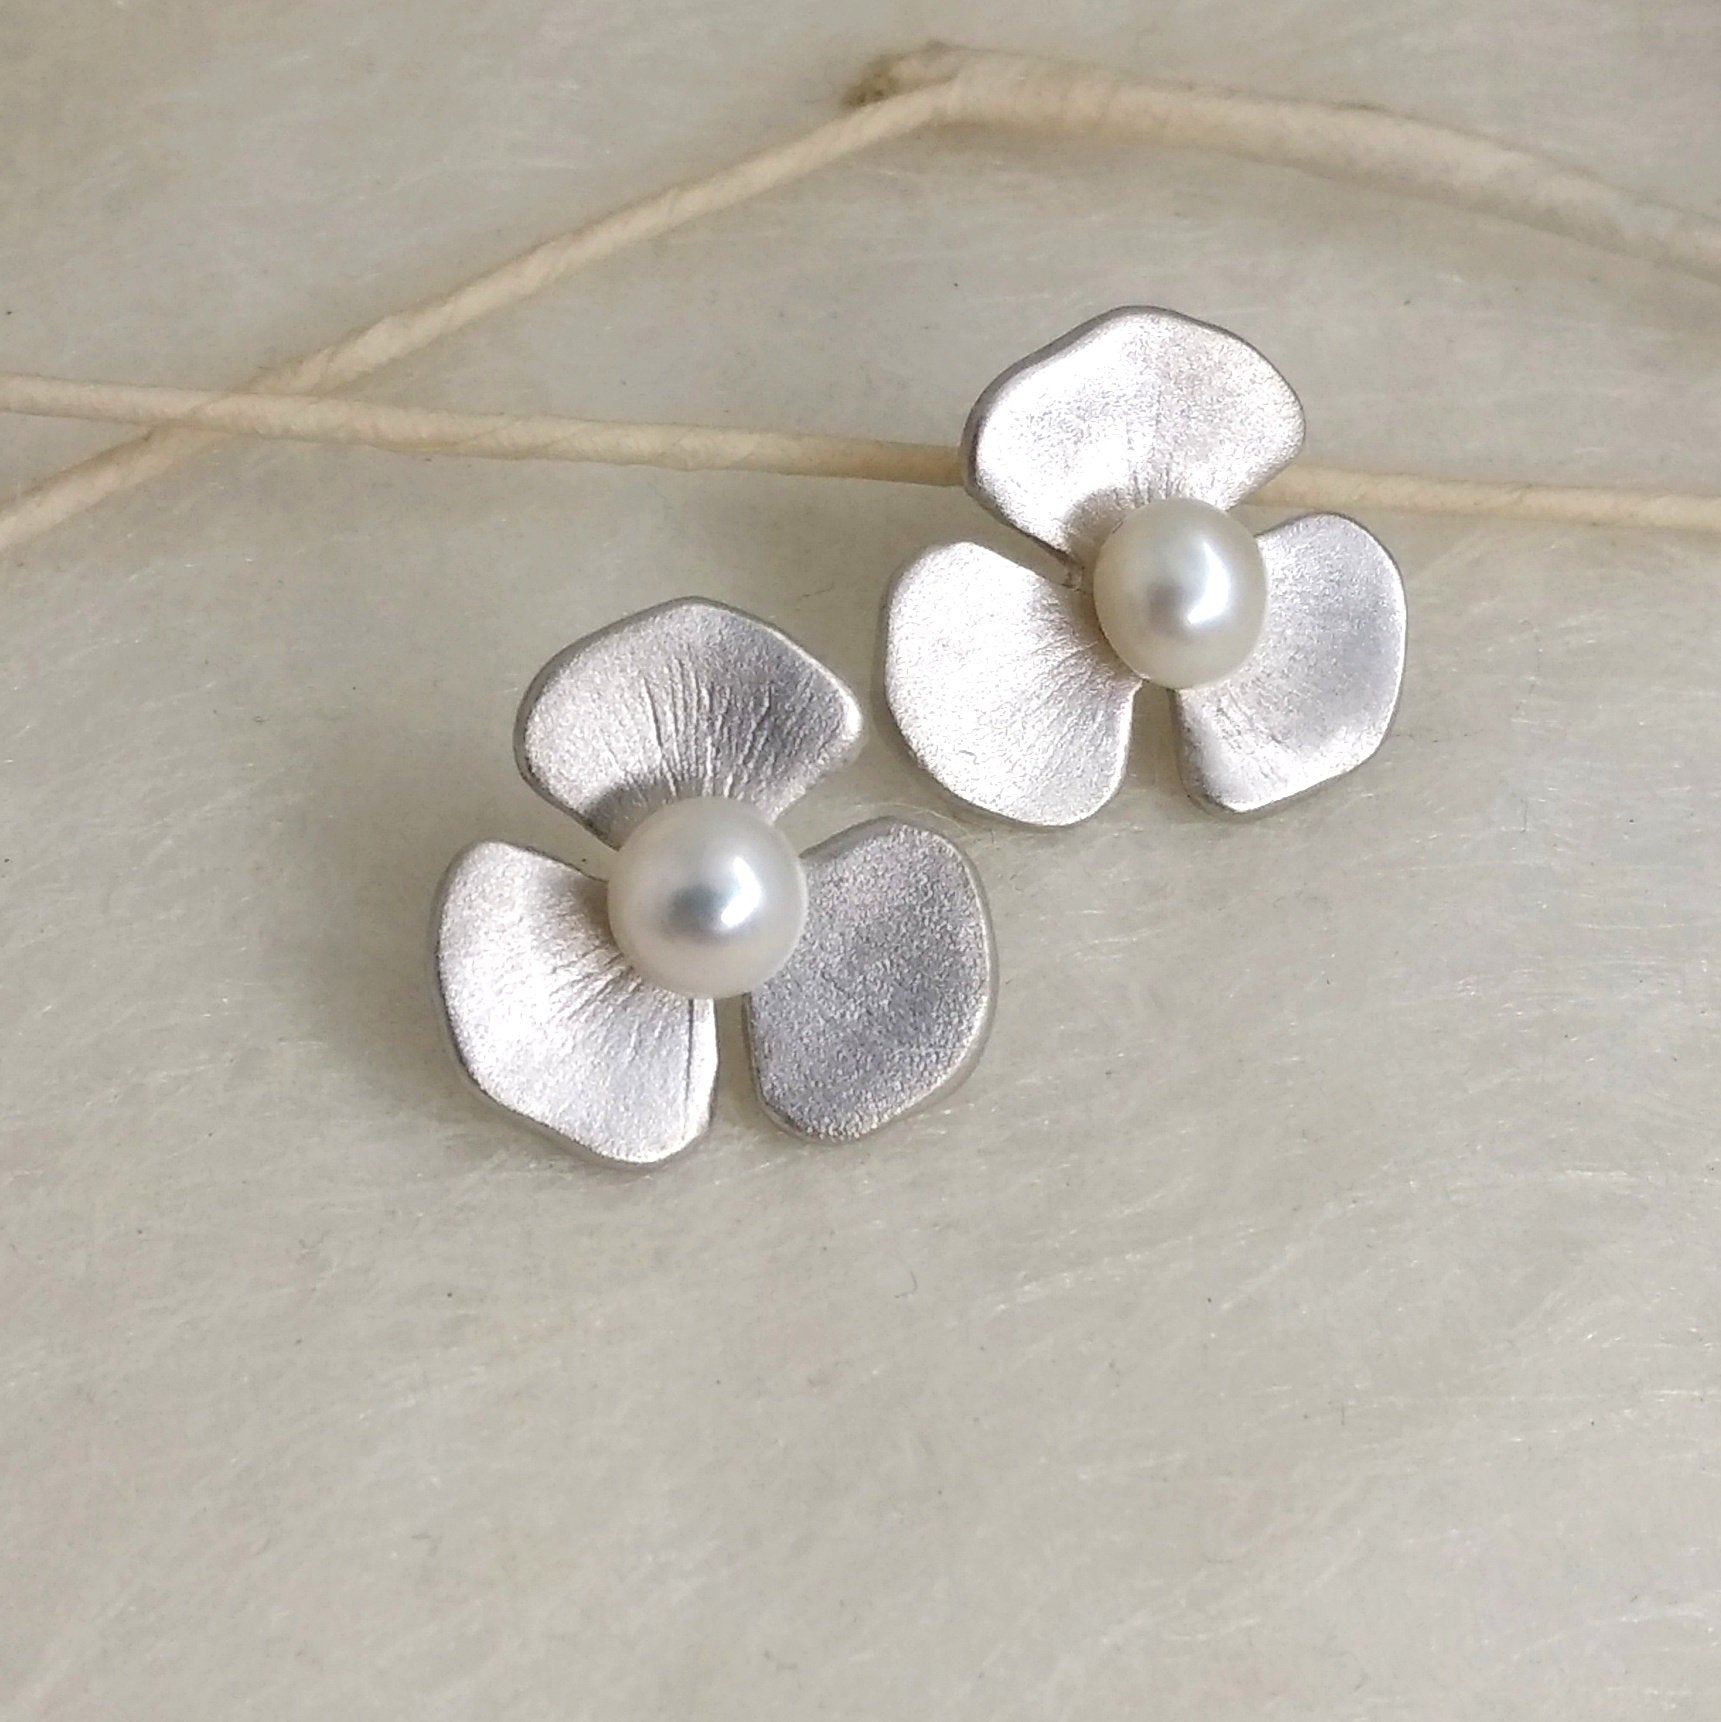 LoRe - Sterling Silver studs with white pearls, available in 2 finishes